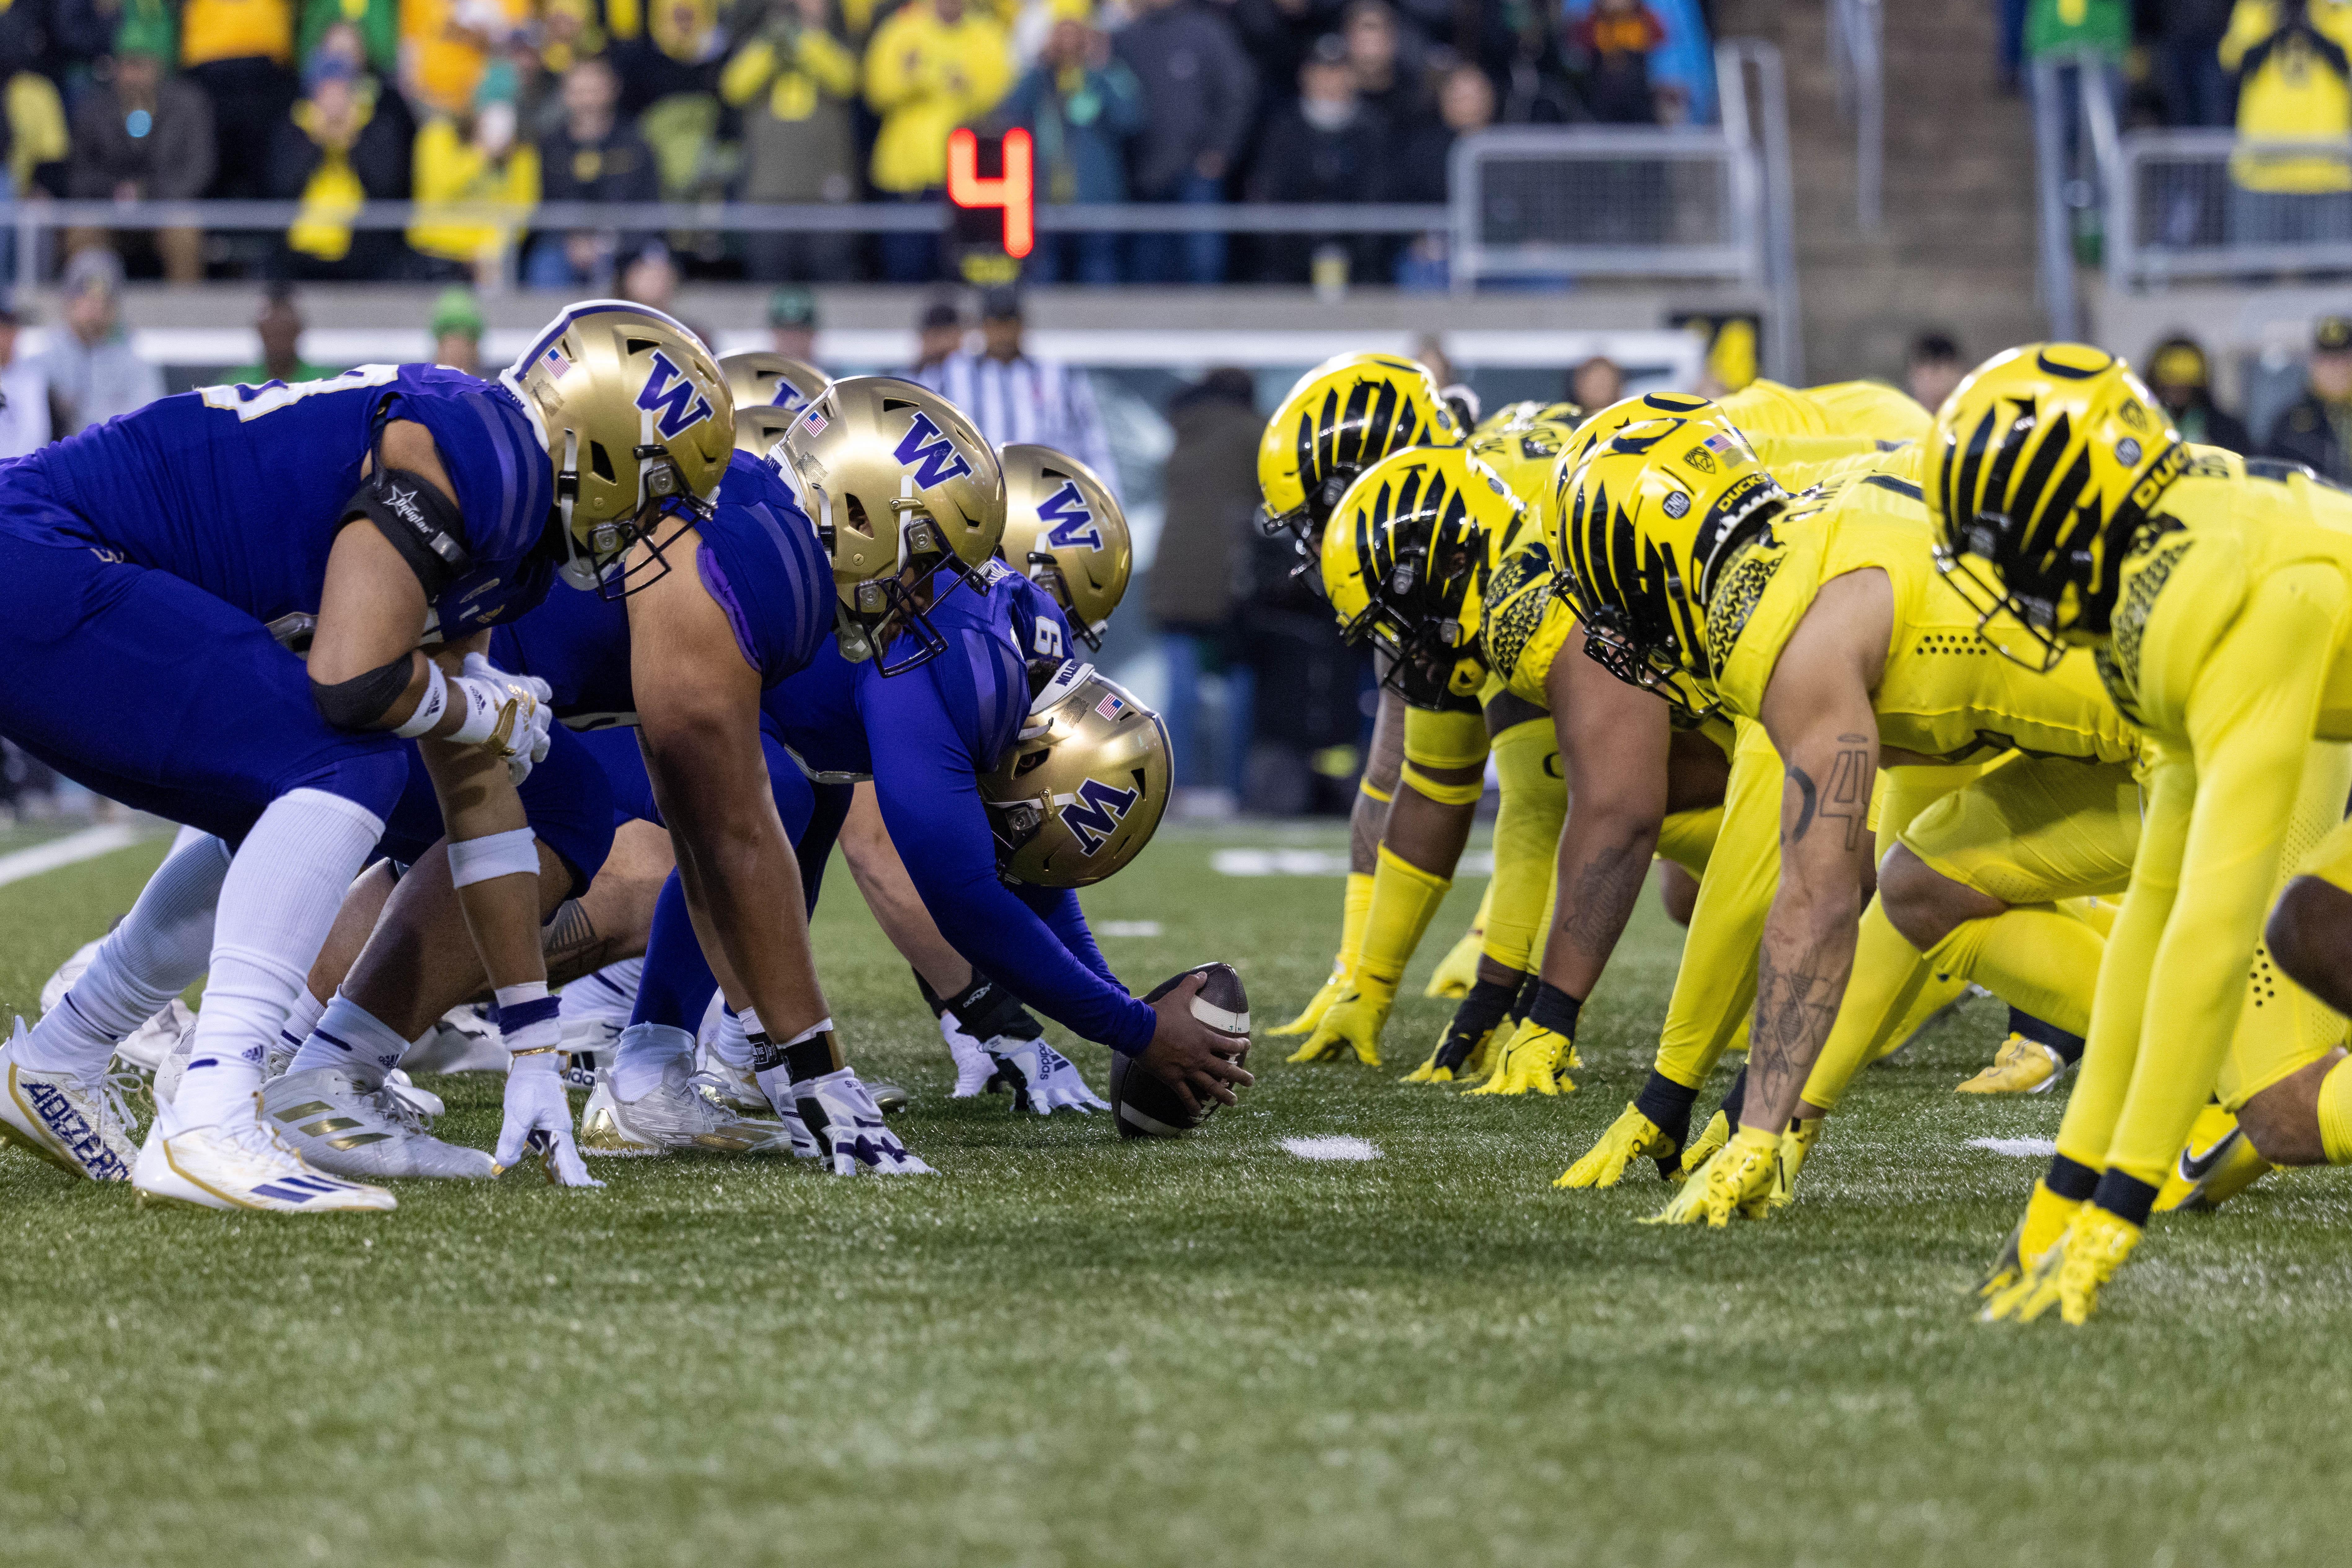 The line of scrimmage between the teams, Washington's center getting ready to snap the ball. 